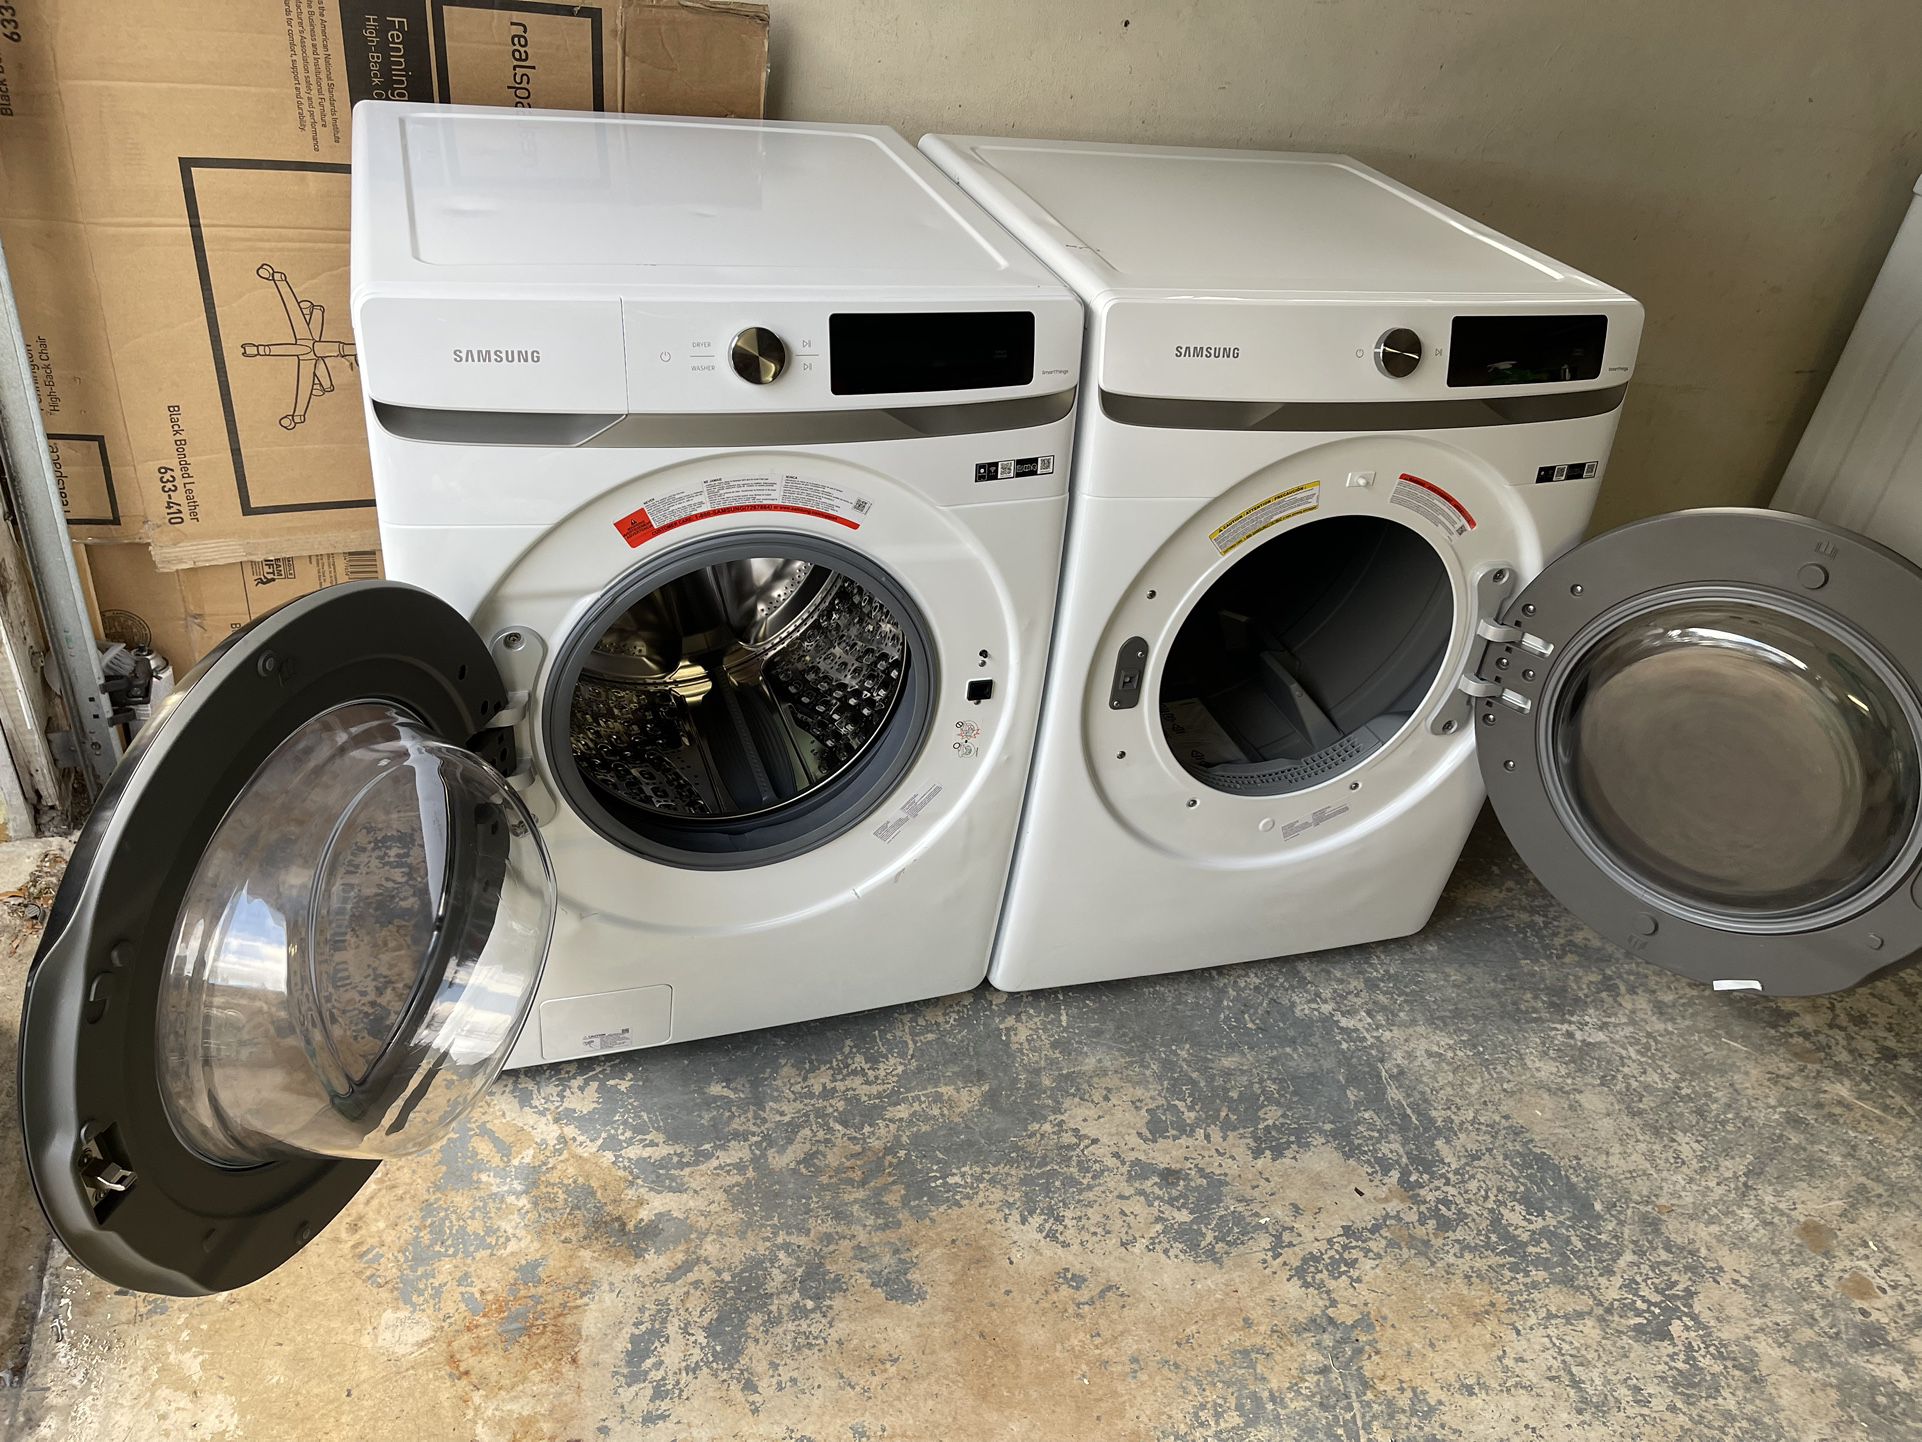 New Open Box Samsung Washer And Dryer 27” Scratch And Dents In Good Working Conditions 